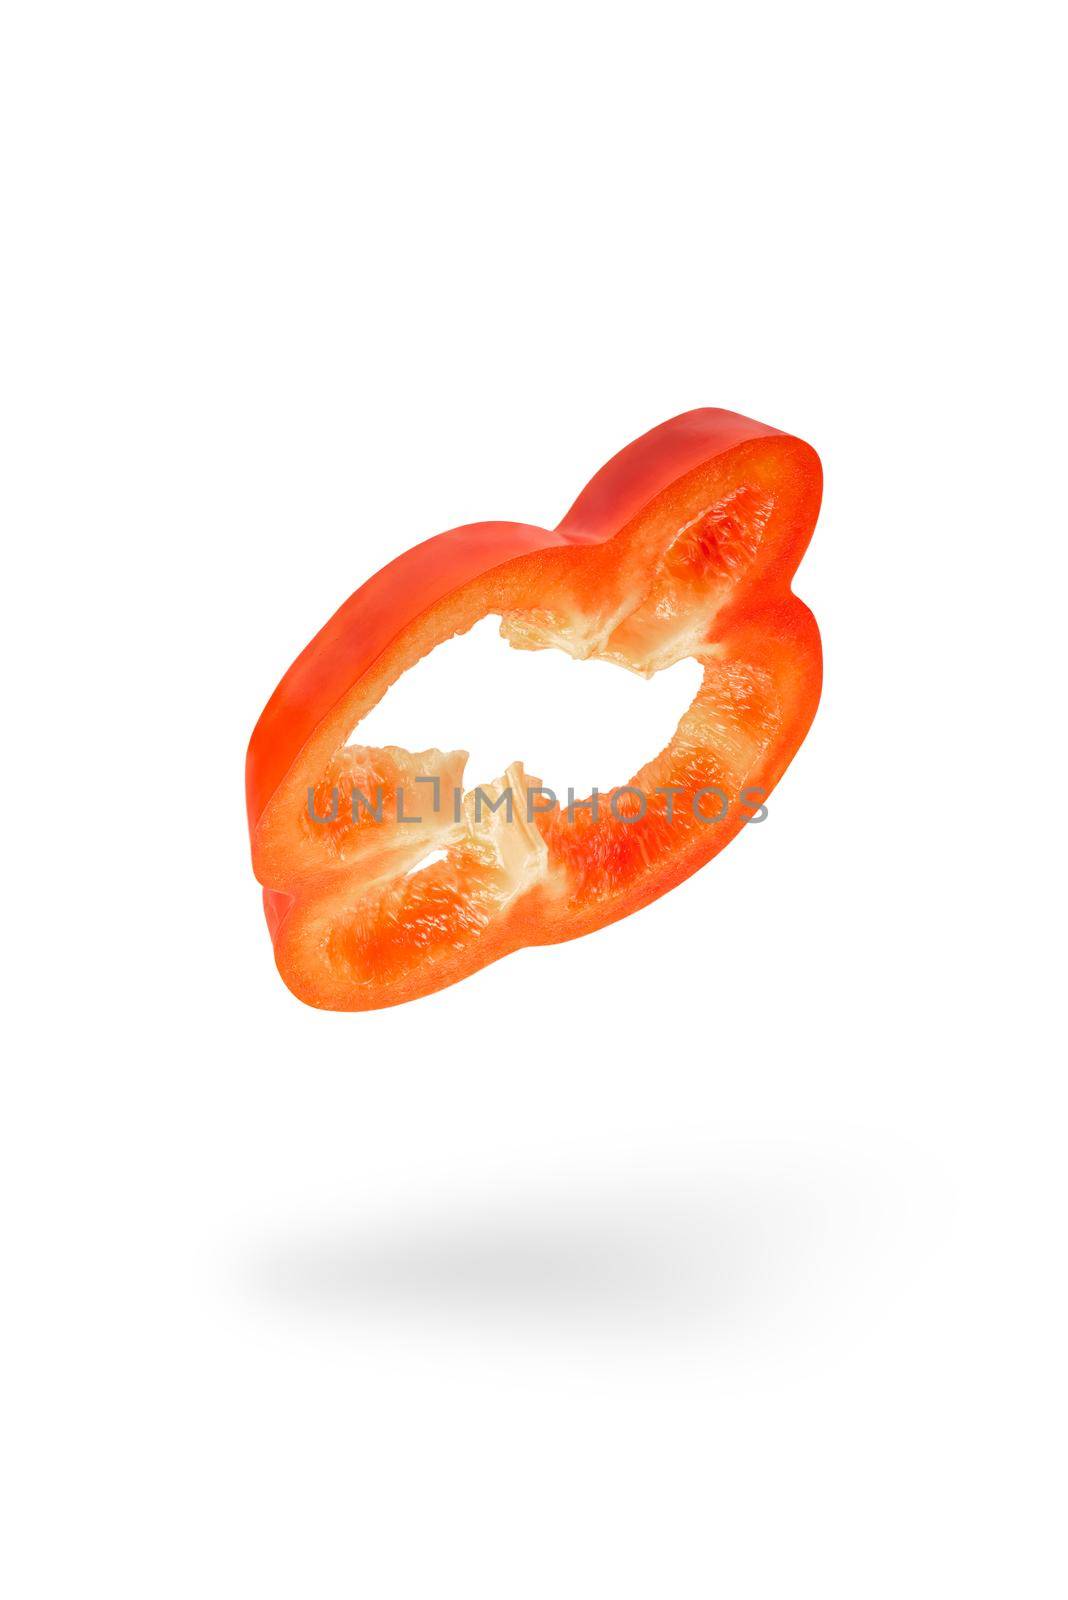 A slice of red paprika falls on a white backdrop. Red bell pepper flying in air on isolated white background.